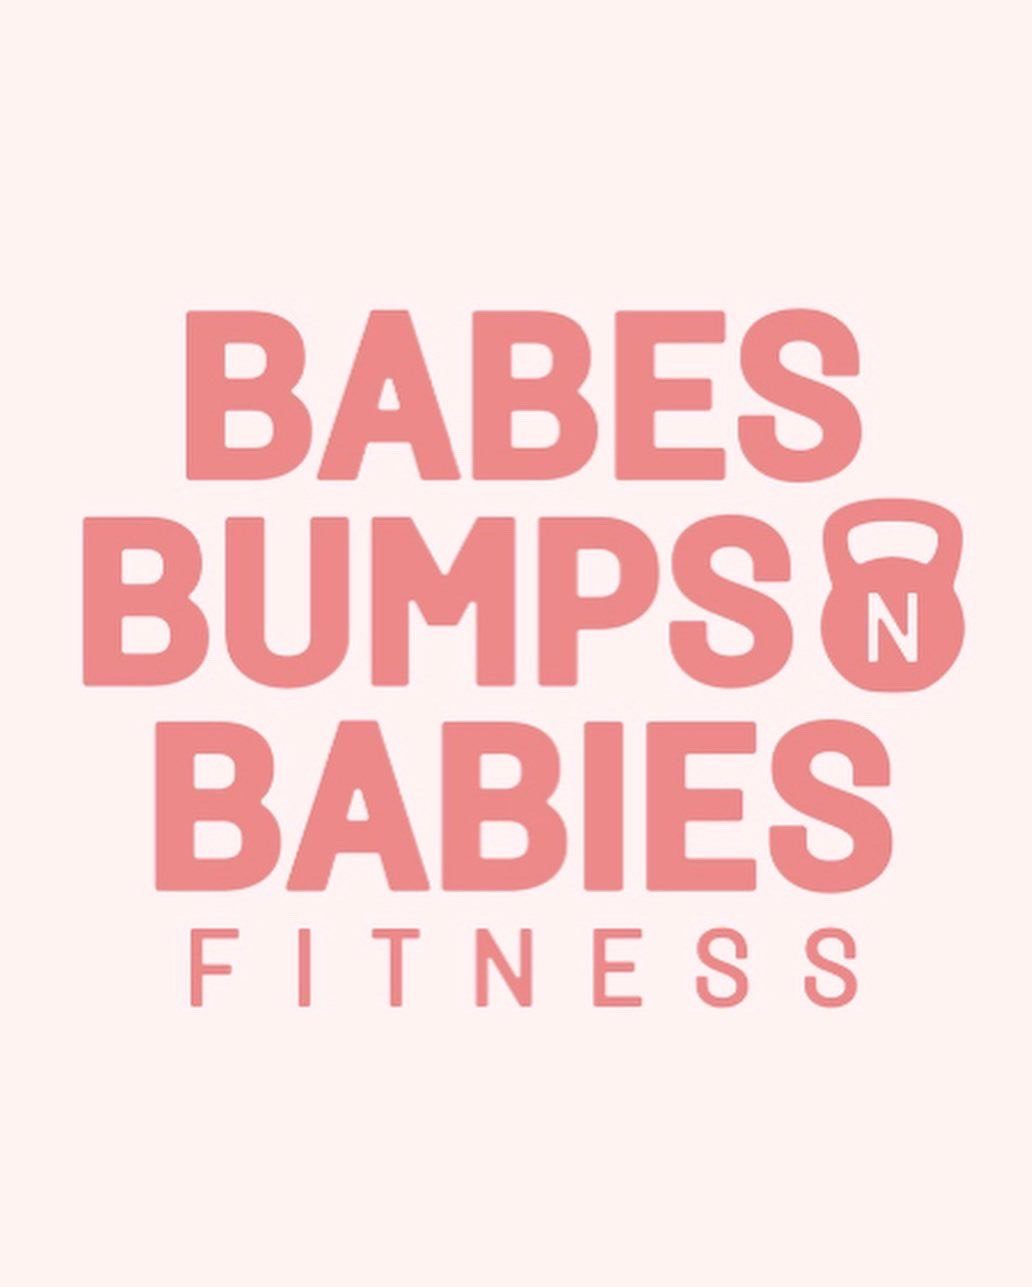 Babes, Bumps n Babies Fitness